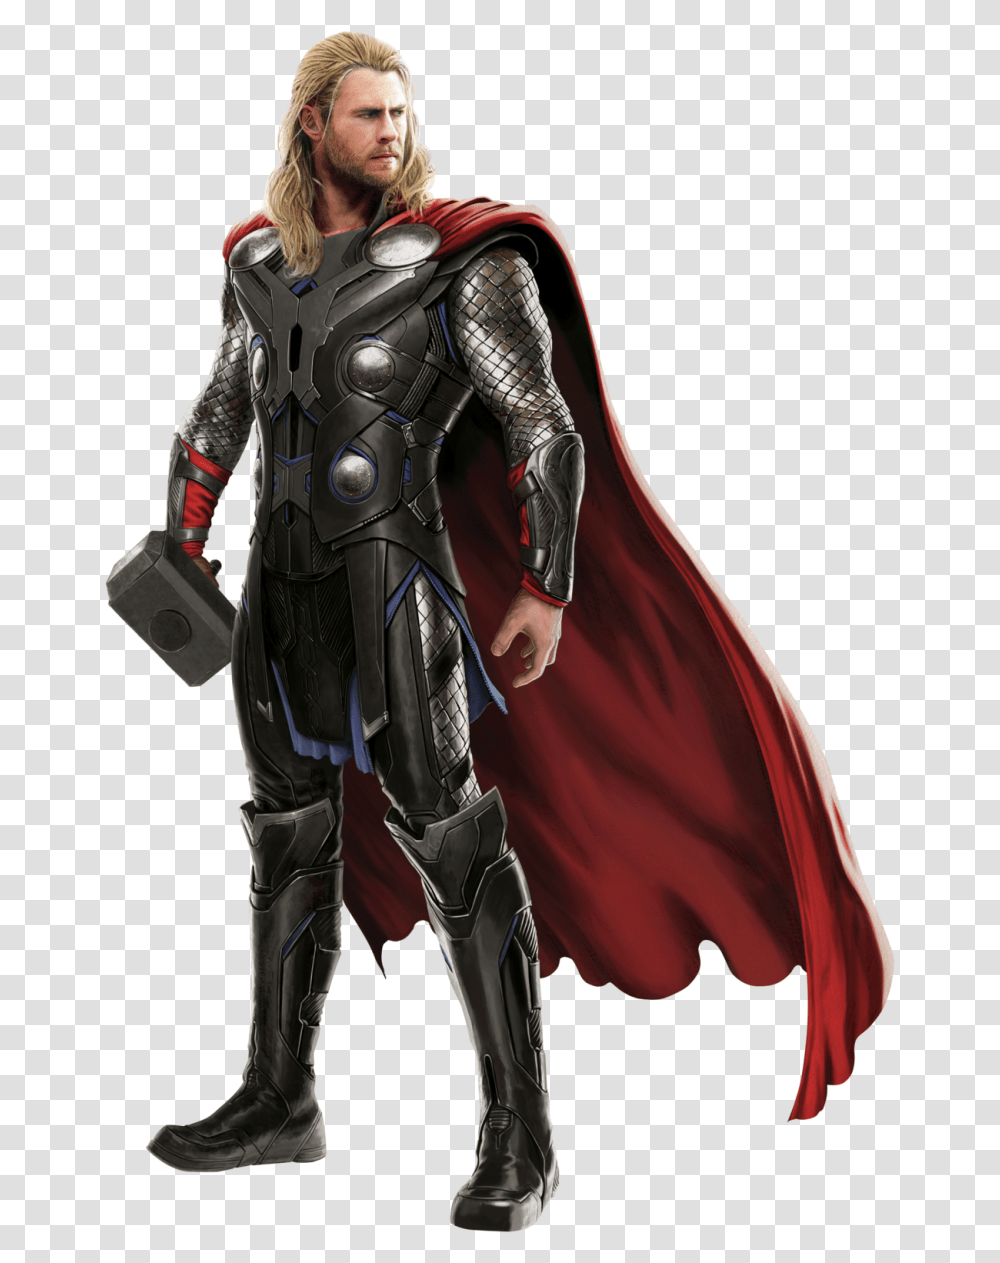 Download Thor File For Designing Projects Thor, Person, Human, Apparel Transparent Png